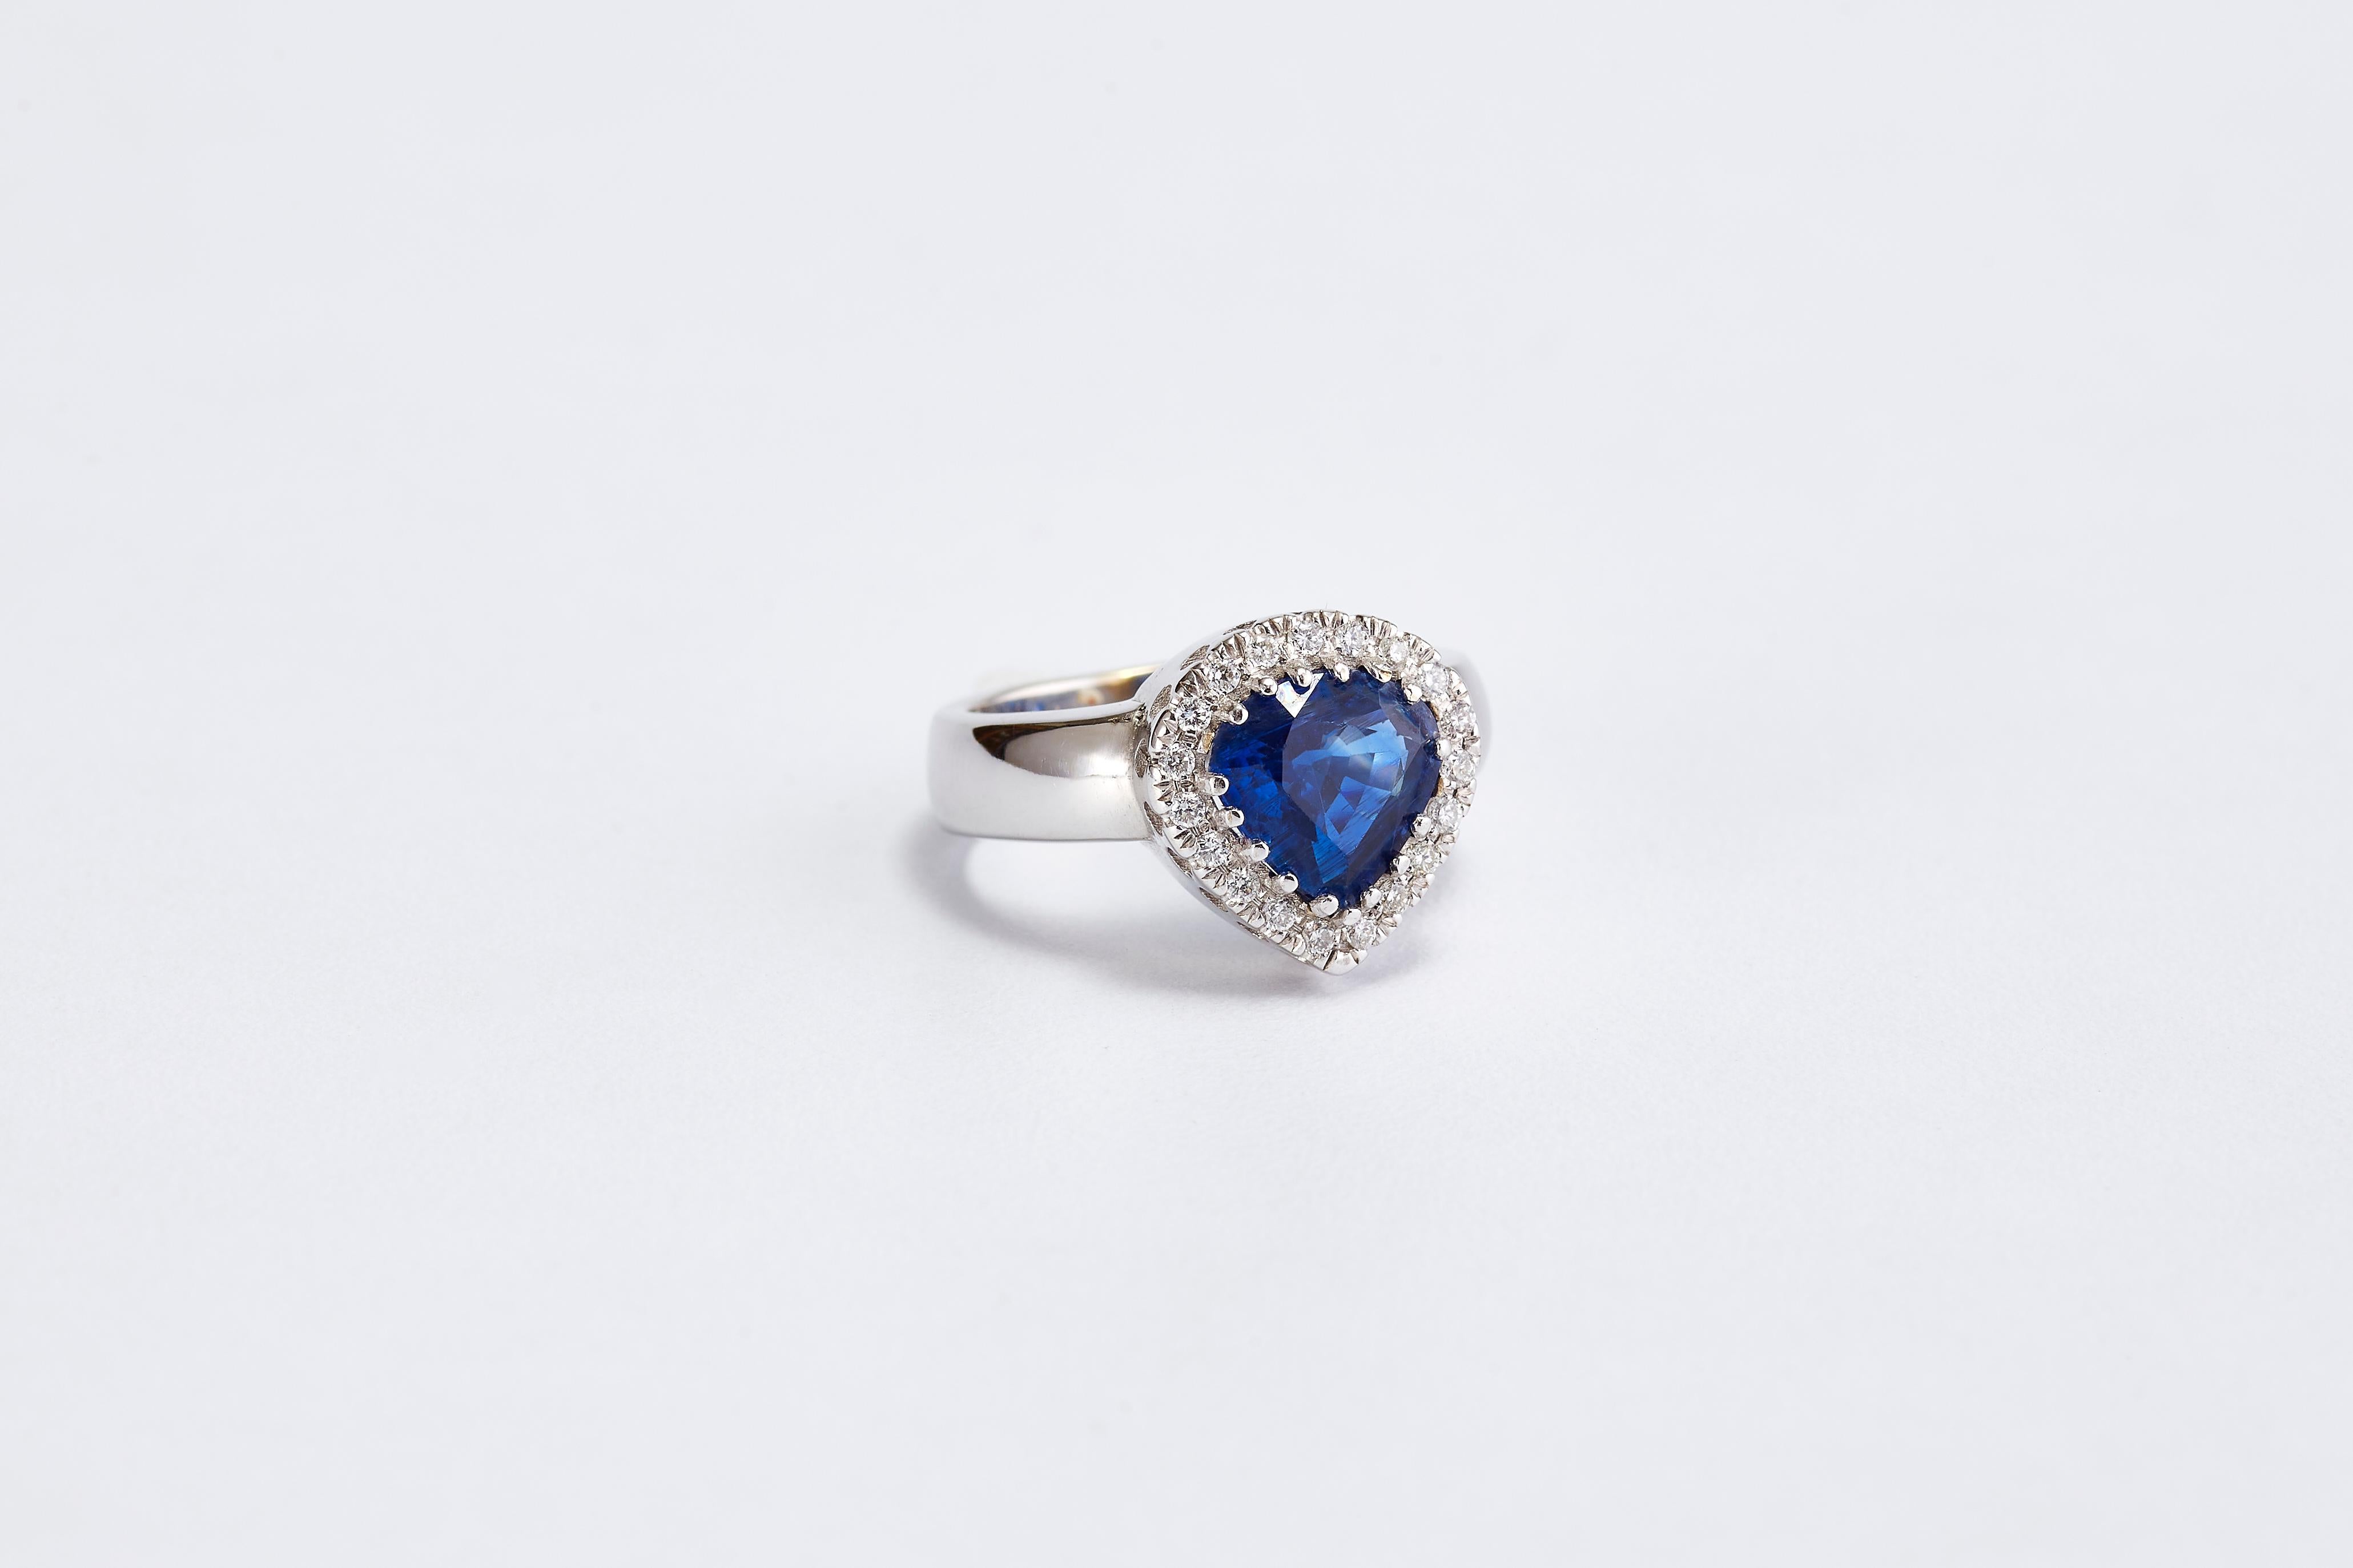 Heart Mixed Shape Certified 3.33 carat Sapphire and Diamond White Gold Ring
Amazing transparent blue sapphire (certified) and diamond ring. 
Total diamonds weight 0.48 ct. Set with Sapphire corundum weight of 3.33 ct. 
Comes with certificate for the